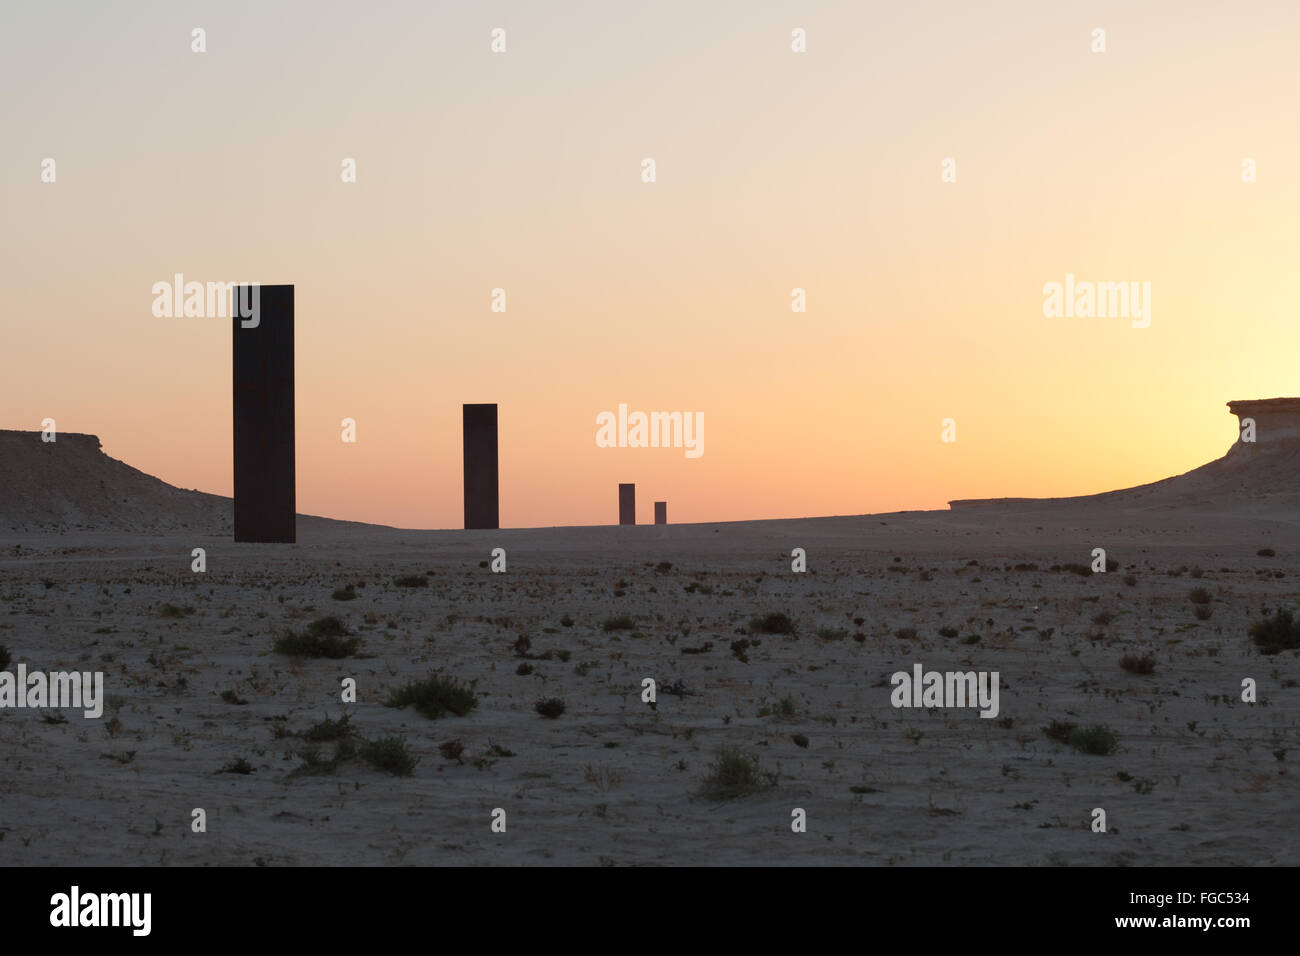 Sunset over East West West East in the Qatari desert. Public art installation by  East West-West East.  Richard Serra commissioned by Qatar Museums Authority. Stock Photo